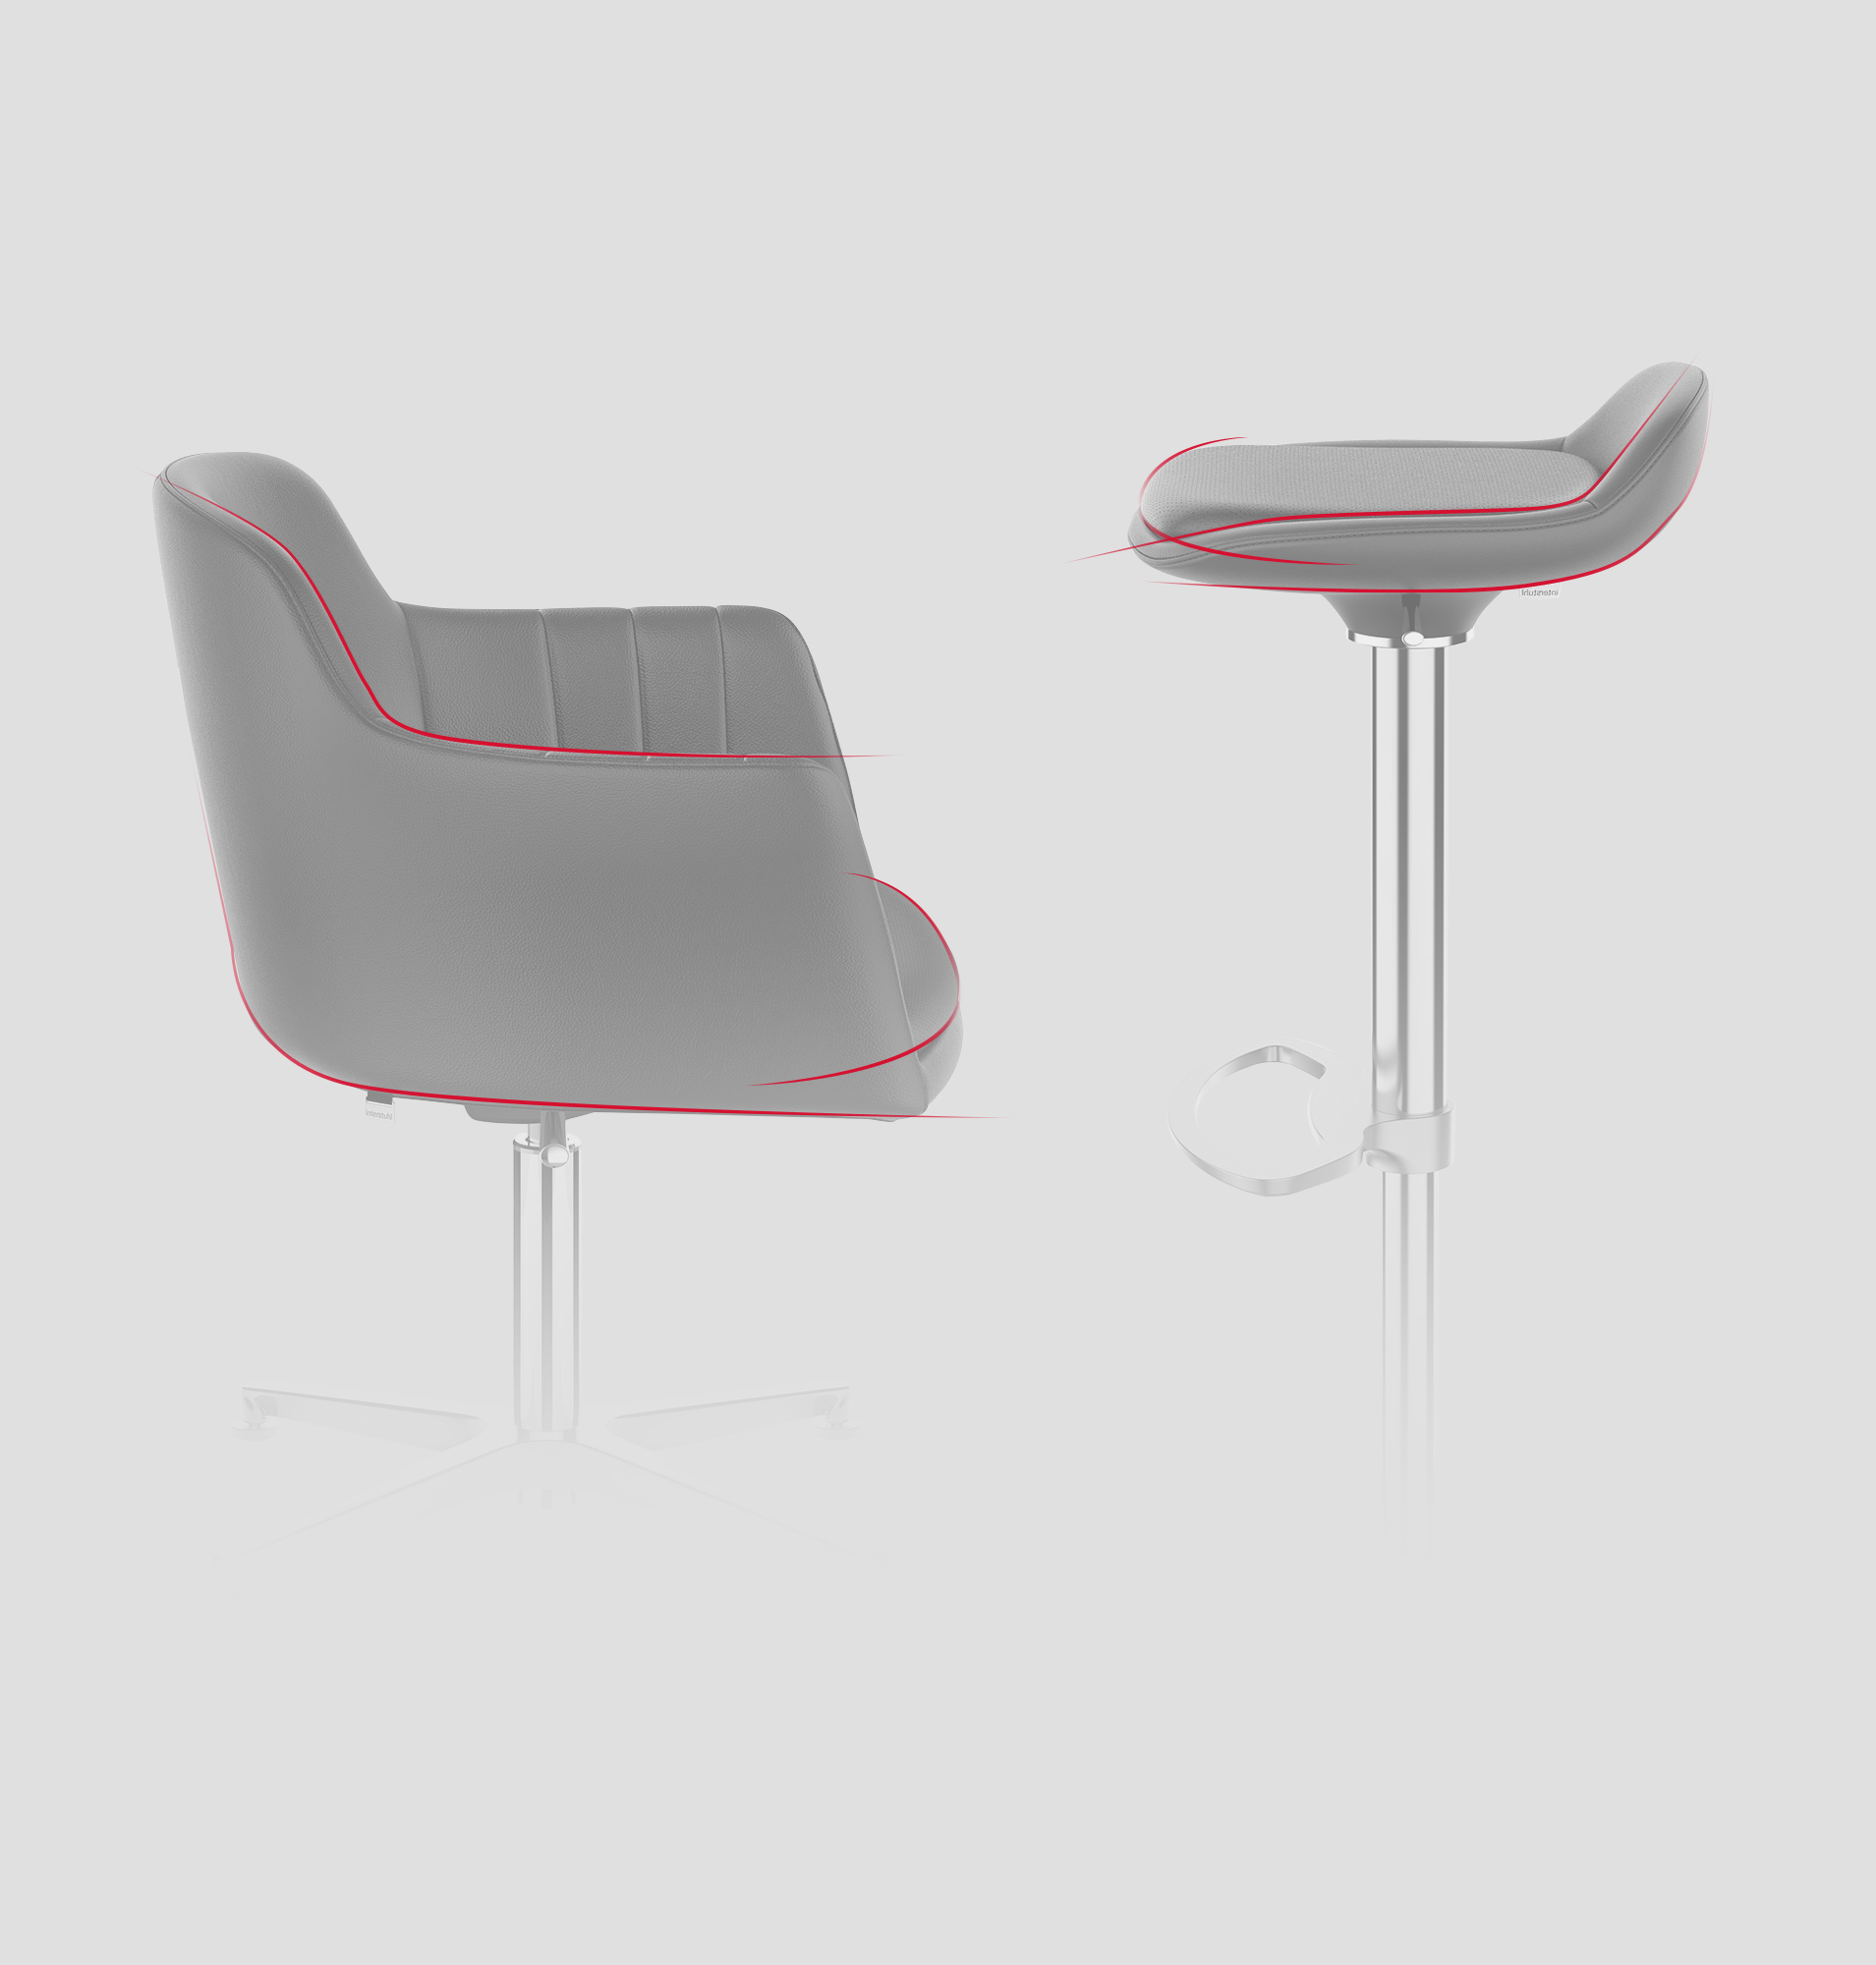 Side view of the LEMON club chair and LIME bar stool highlighting the contours with dynamic lines | by studiokurbos and Interstuhl